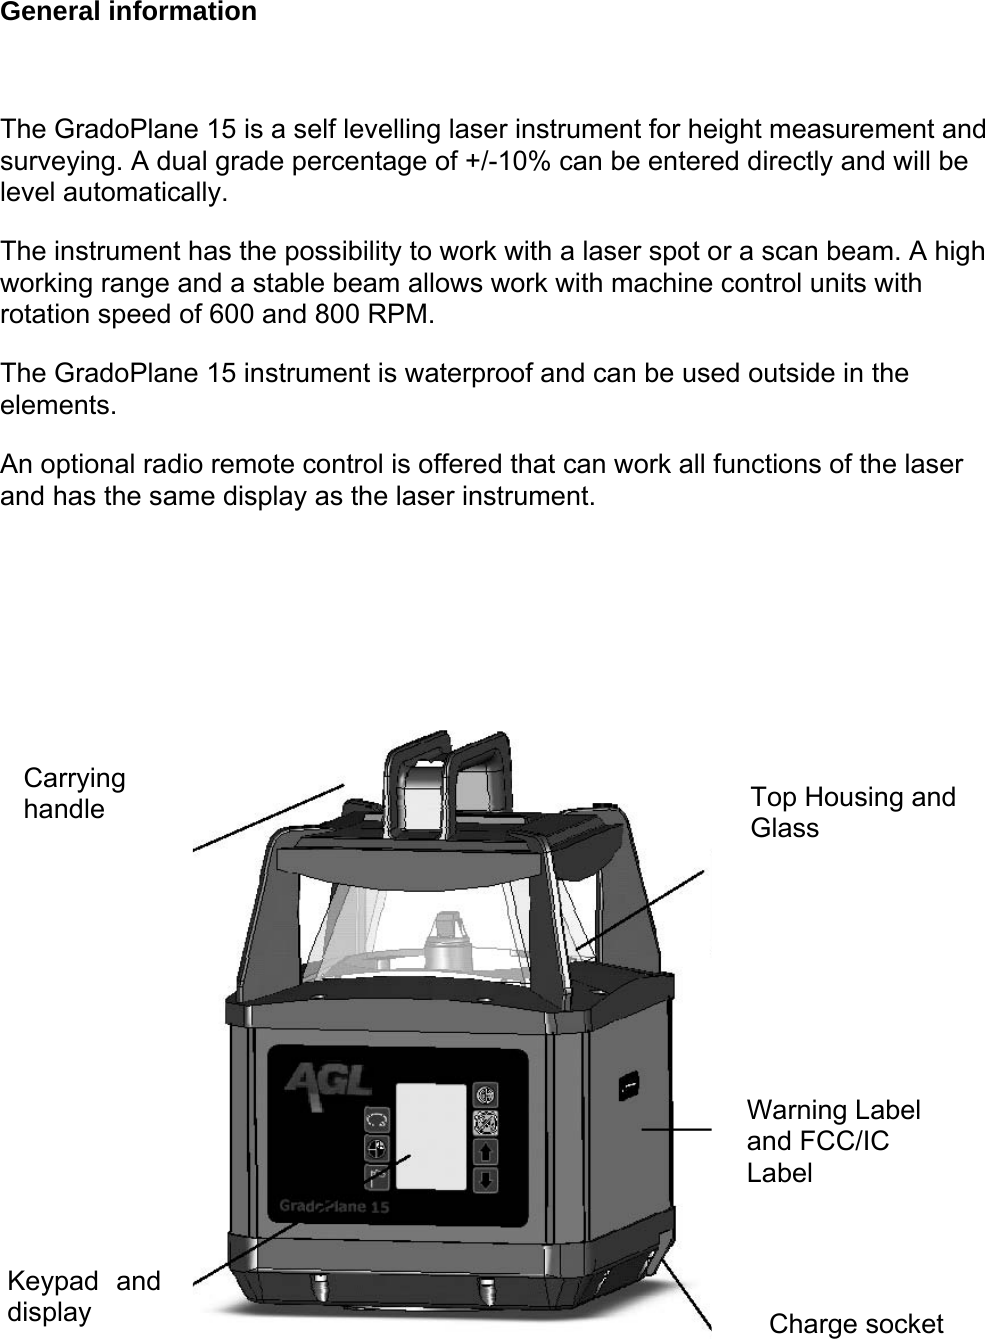 General information  The GradoPlane 15 is a self levelling laser instrument for height measurement and surveying. A dual grade percentage of +/-10% can be entered directly and will be level automatically.  The instrument has the possibility to work with a laser spot or a scan beam. A high working range and a stable beam allows work with machine control units with rotation speed of 600 and 800 RPM.  The GradoPlane 15 instrument is waterproof and can be used outside in the elements.   An optional radio remote control is offered that can work all functions of the laser and has the same display as the laser instrument.  Carrying handle   Top Housing and Glass   Warning Label and FCC/IC Label  Keypad and display   Charge socket  